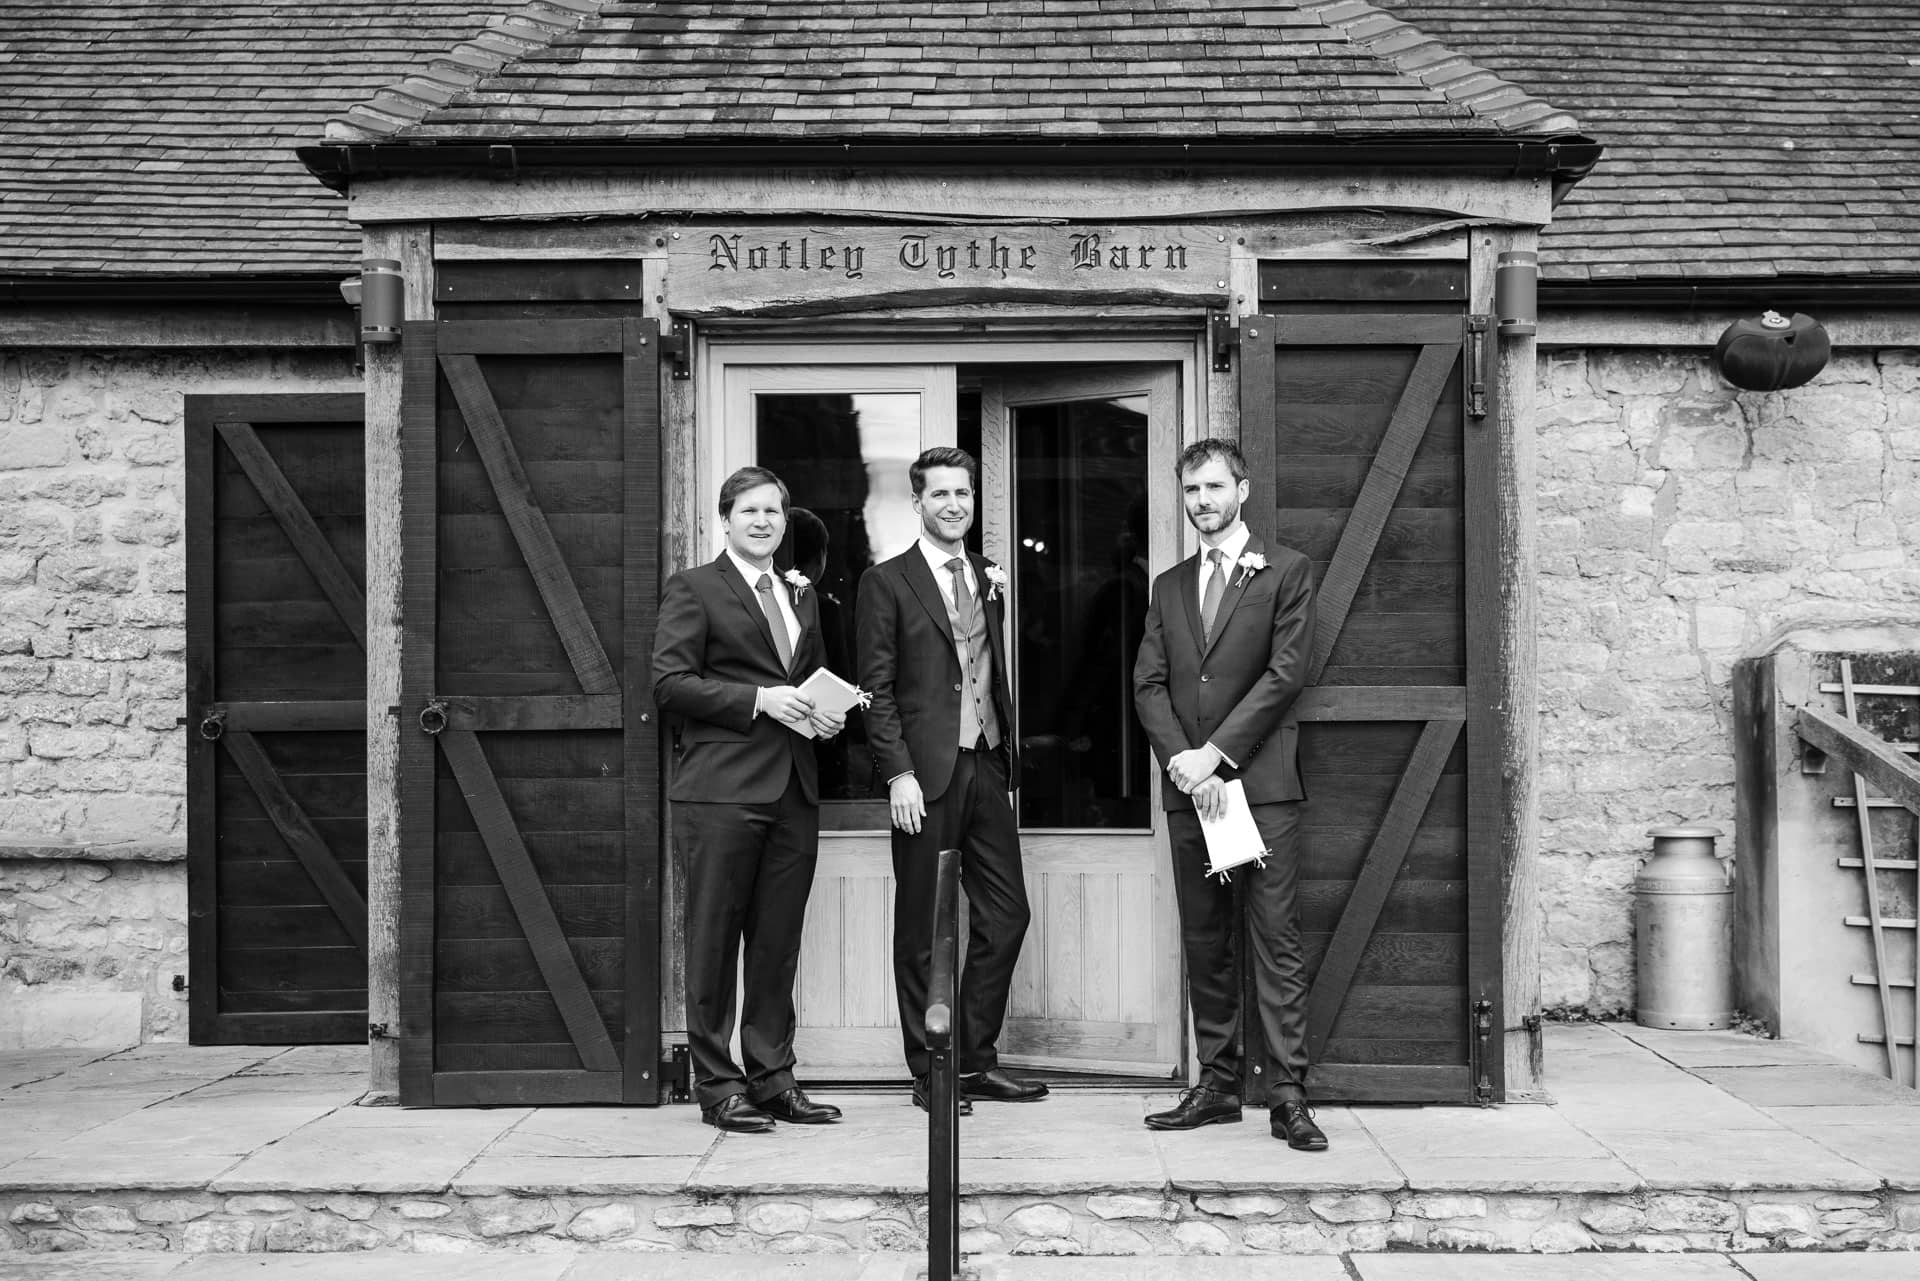 Ushers and Groom outside of the Notley Tythe Barn